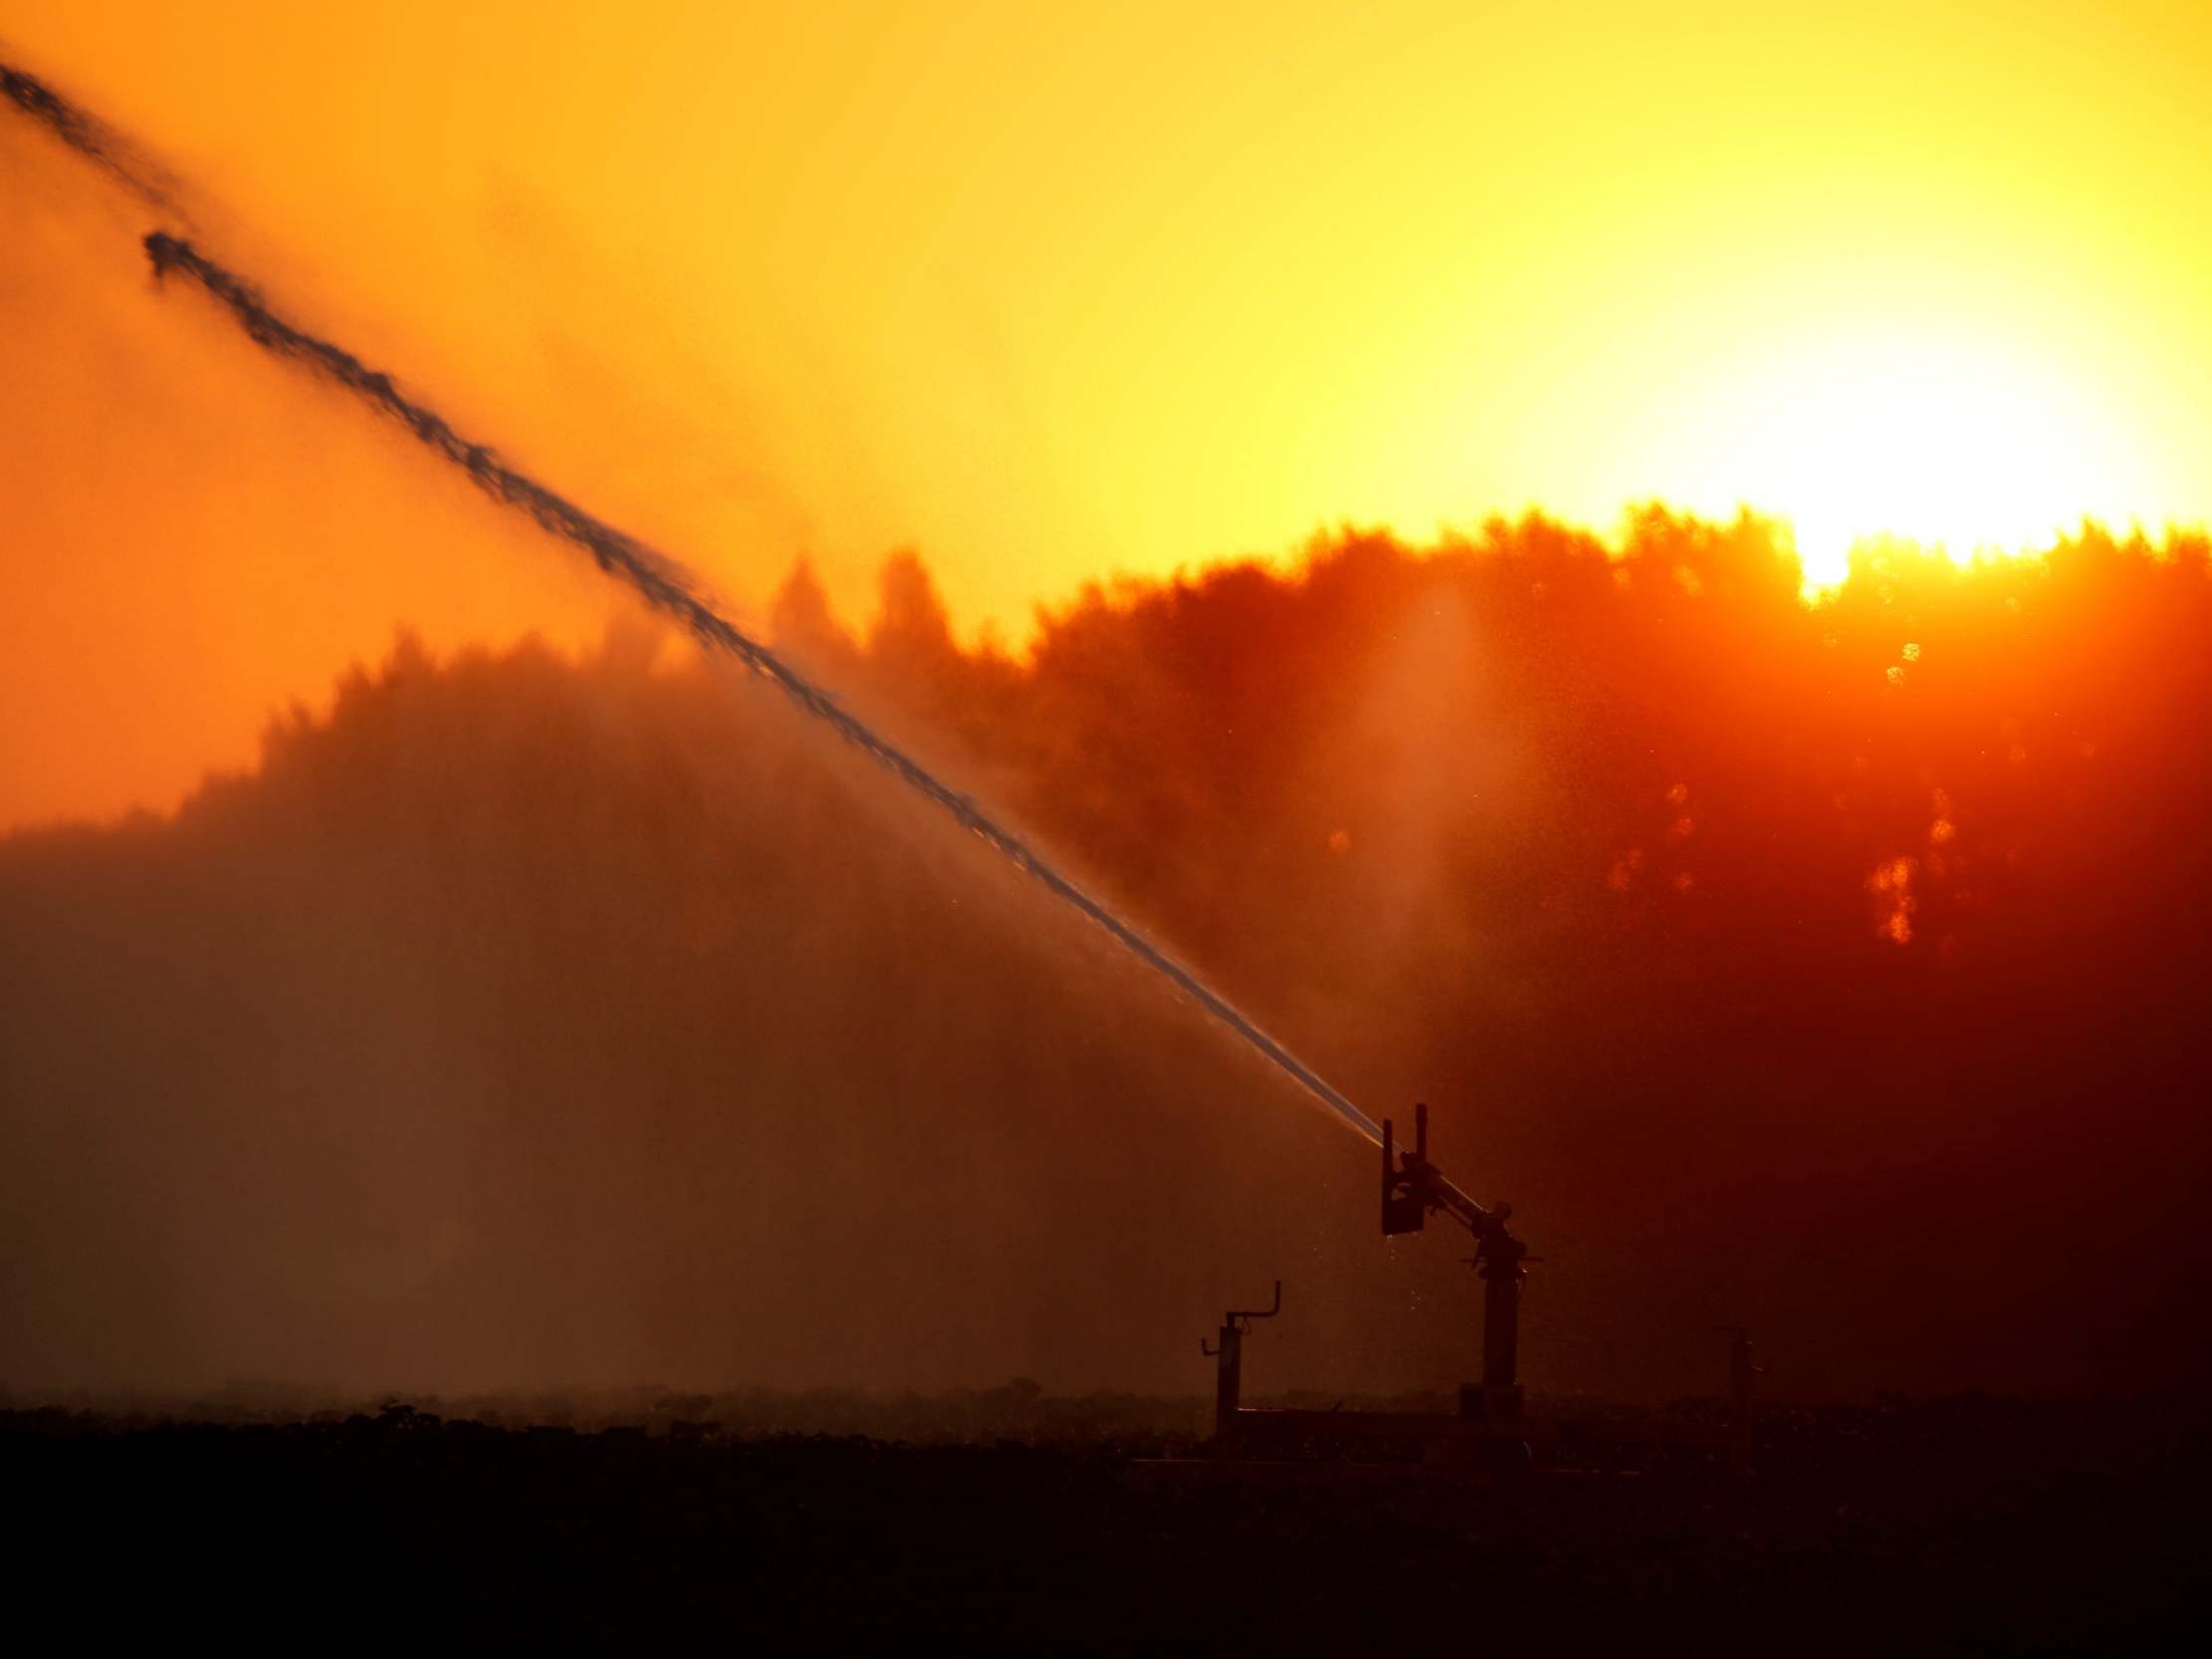 A field is irrigated during a heatwave in France last month. Heatwaves are lasting longer and happening more frequently around the world